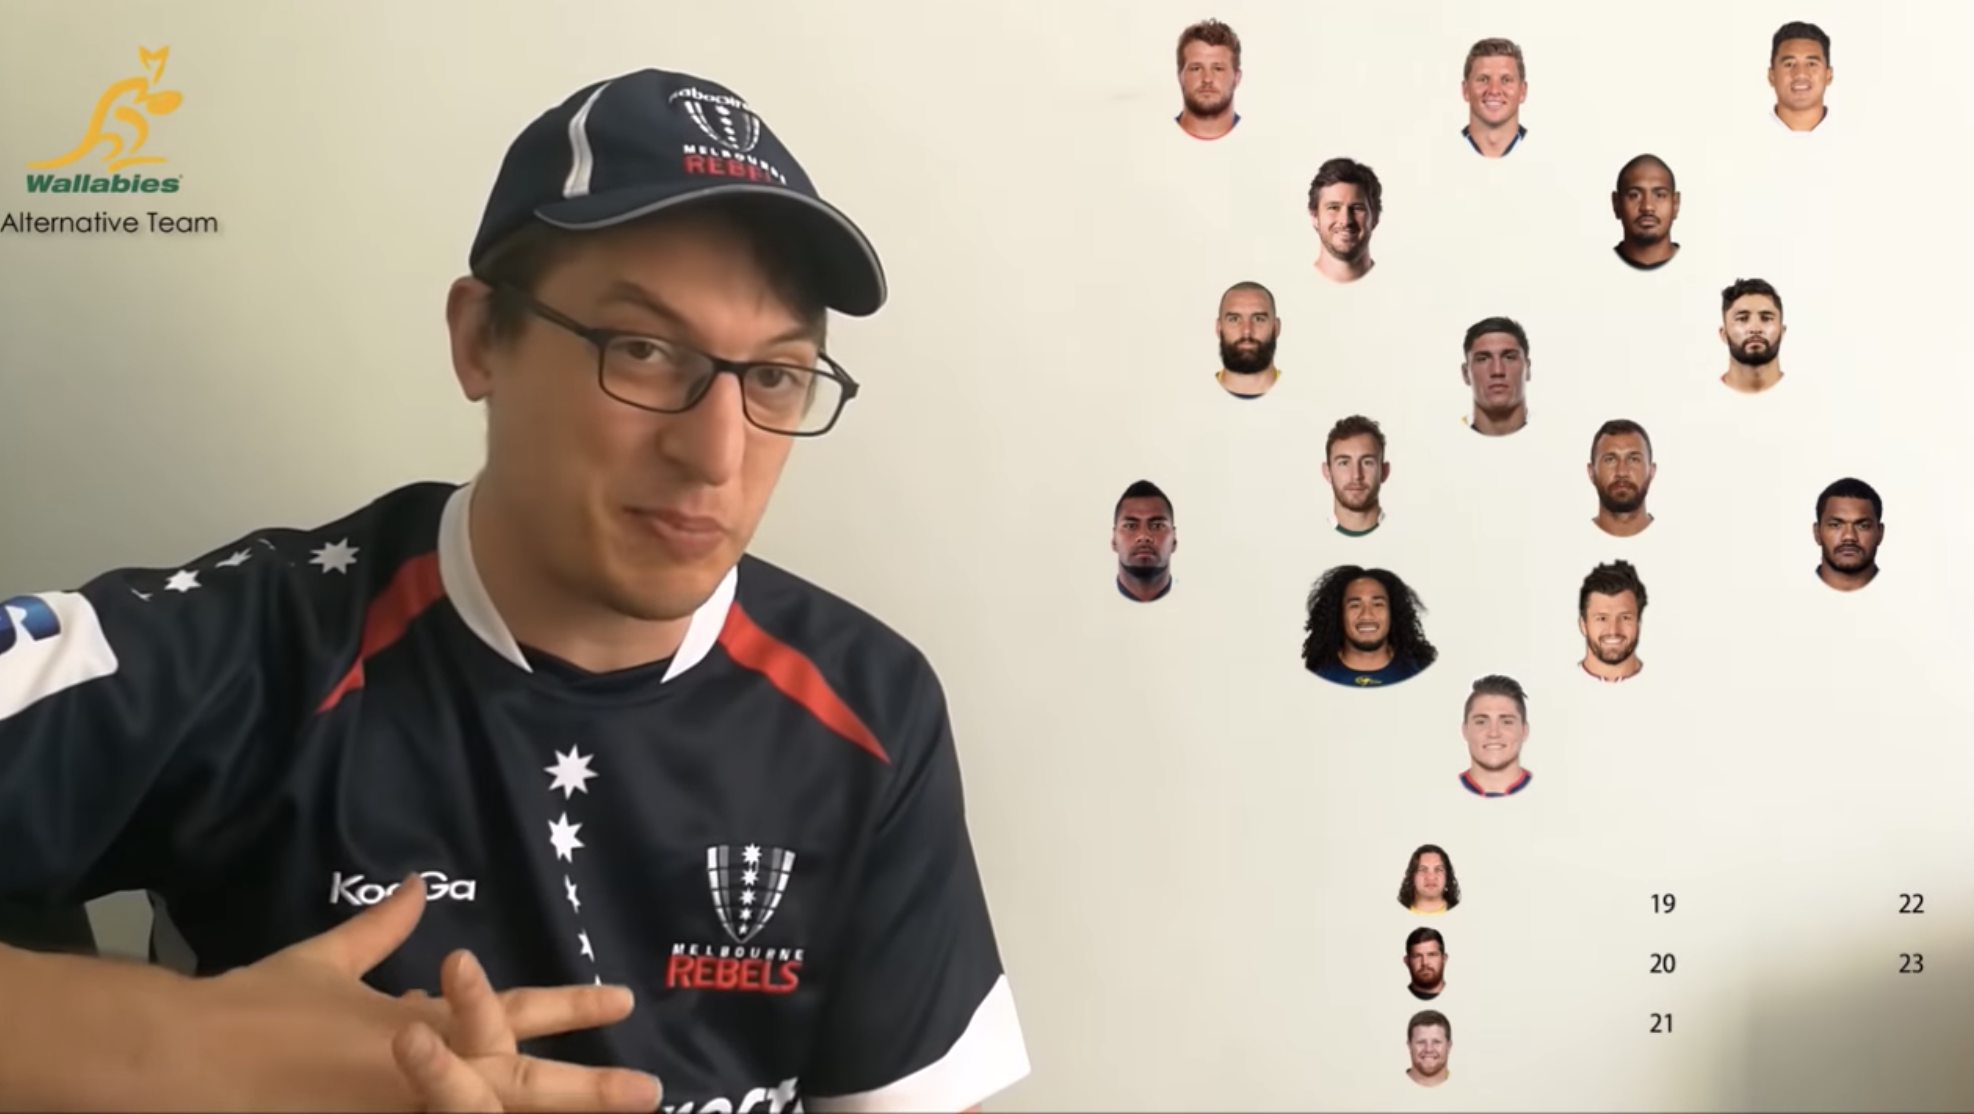 VIDEO: Australian fan picks an "Alternative" team to Michael Cheika - and it could win the World Cup